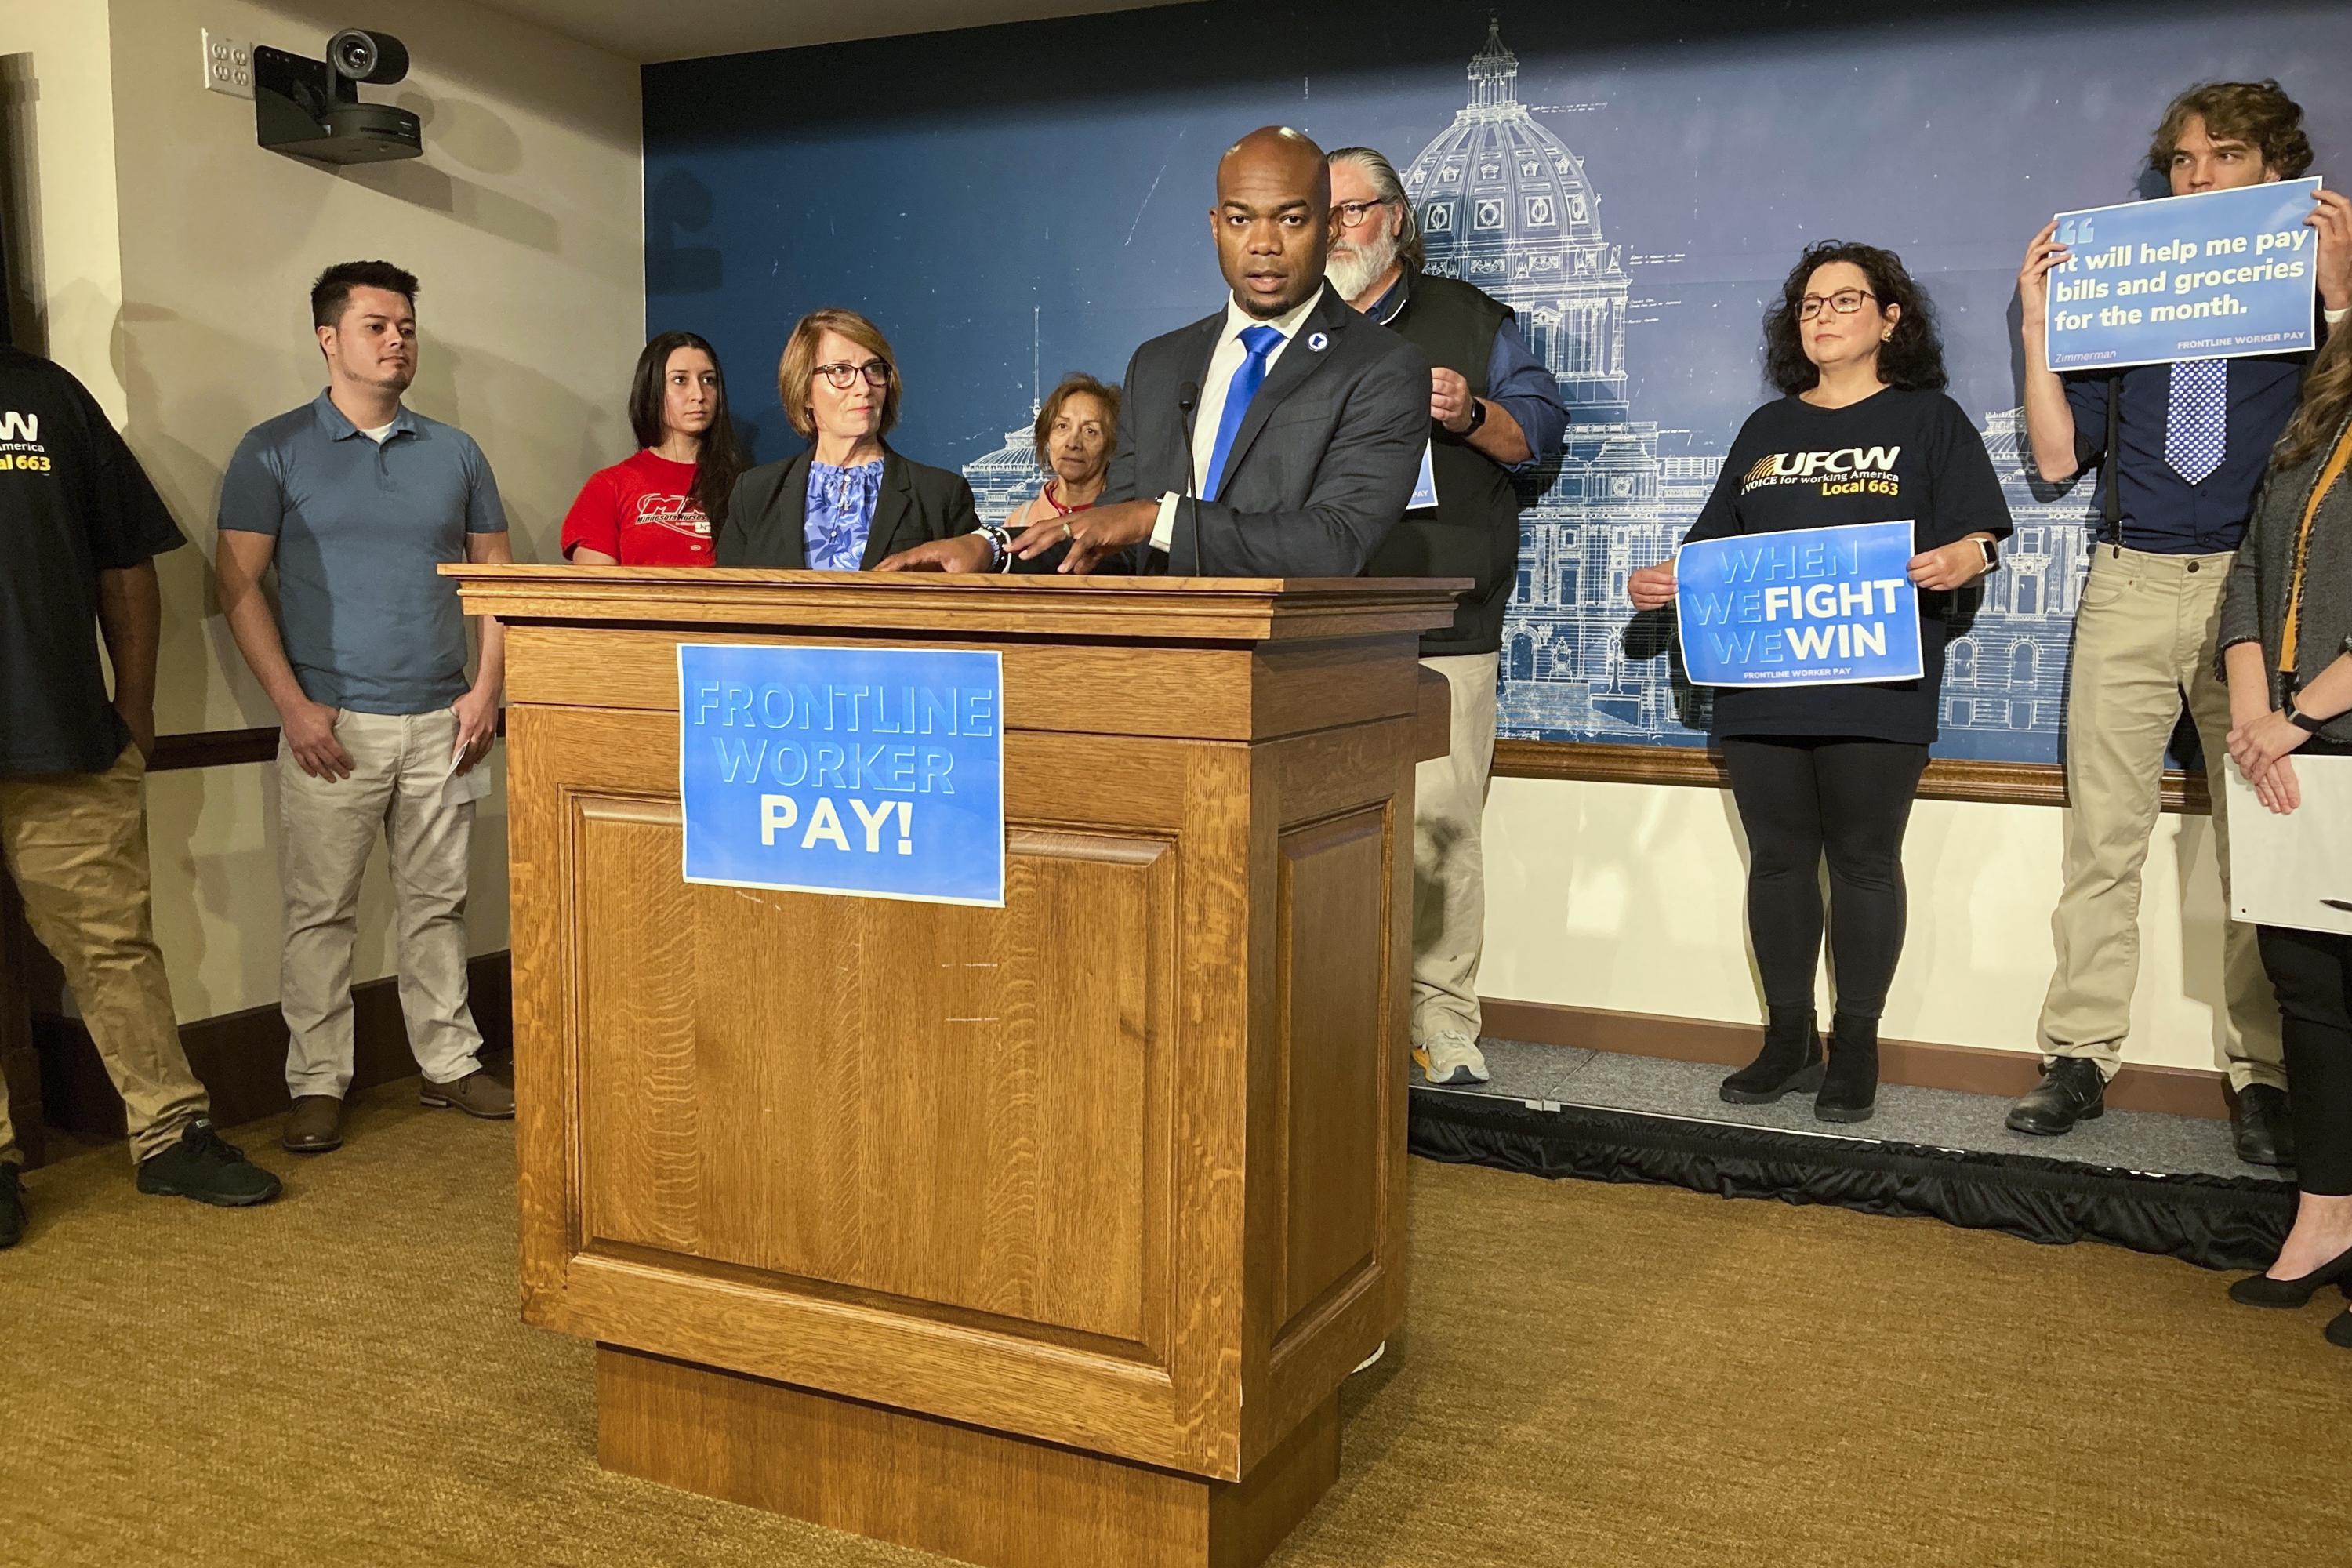 minnesota-will-pay-487-bonuses-to-1m-frontline-workers-ap-news